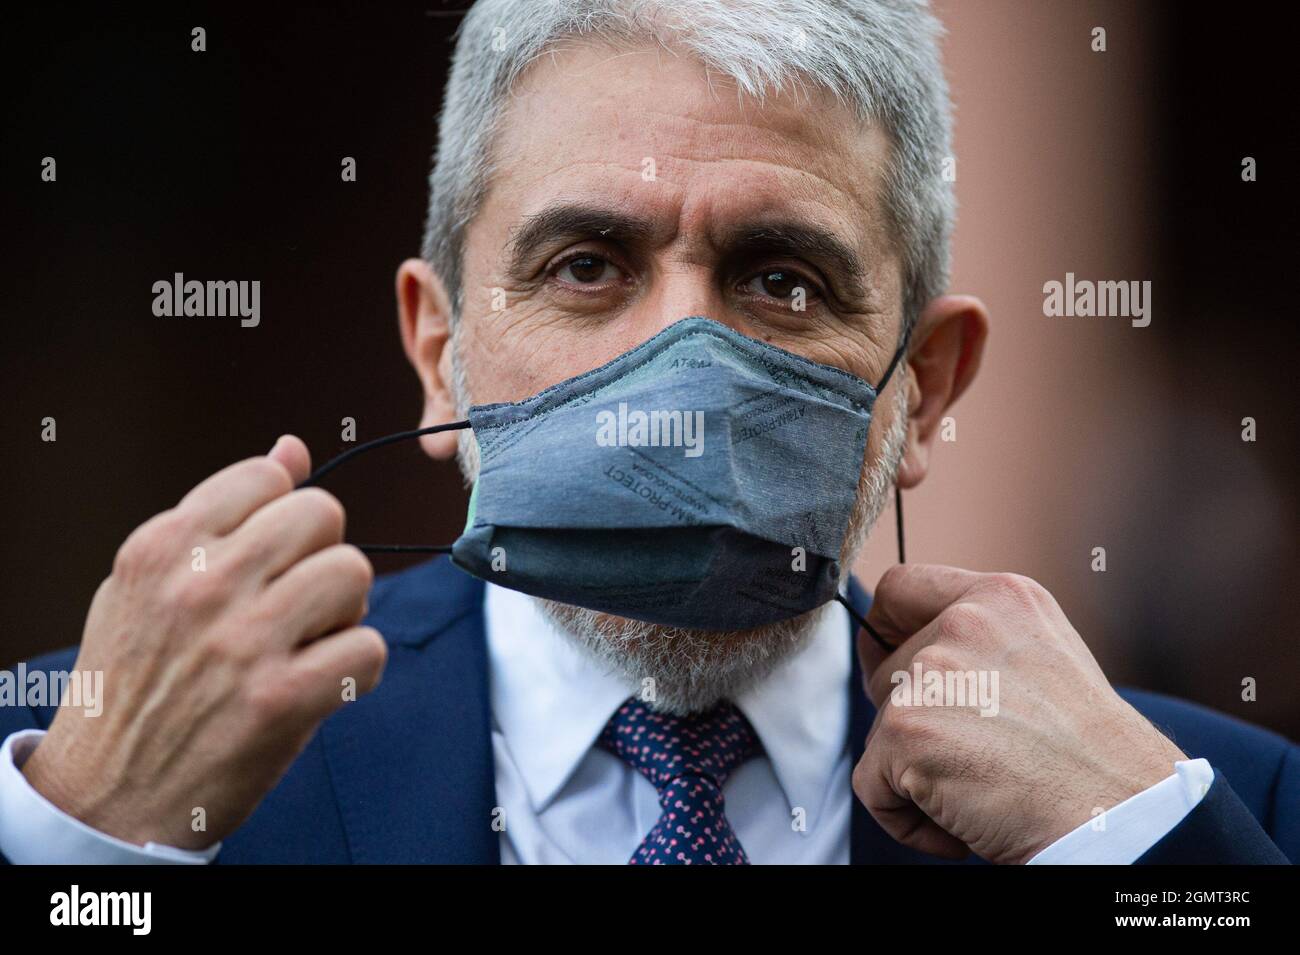 Buenos Aires, Argentina. 20th Sep, 2021. Anibal Fernandez, Designated Minister of Security of Argentina takes off his face mask during the event. After the Political Crisis of the Government of Alberto Fernandez in Argentina, ministers and officials were present at the swearing-in of the new Ministers held at the Government House in Buenos Aires, Argentina. Credit: SOPA Images Limited/Alamy Live News Stock Photo